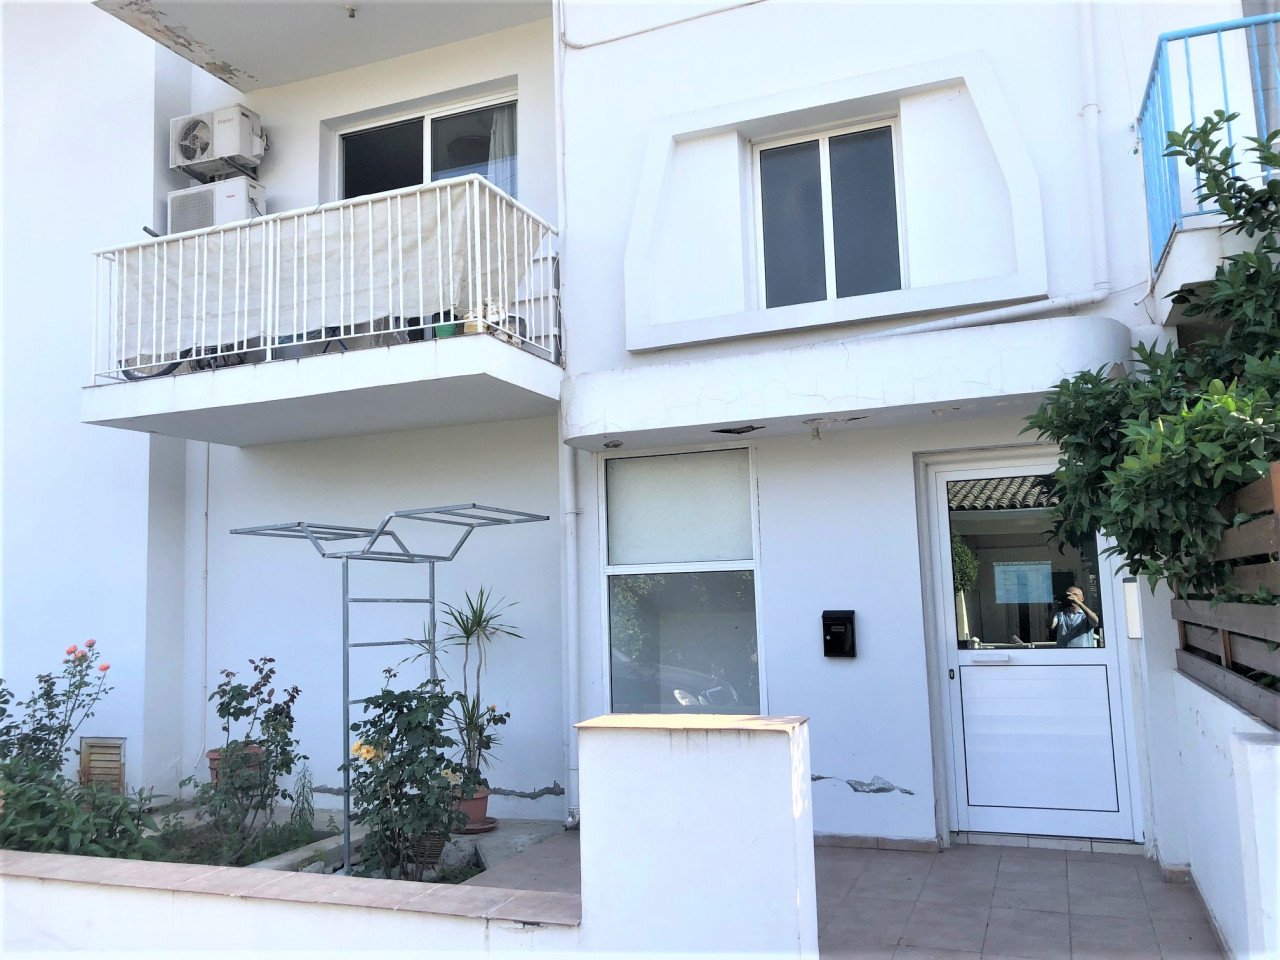 For Sale: Apartment (Flat) in Strovolos, Nicosia for Rent | Key Realtor Cyprus